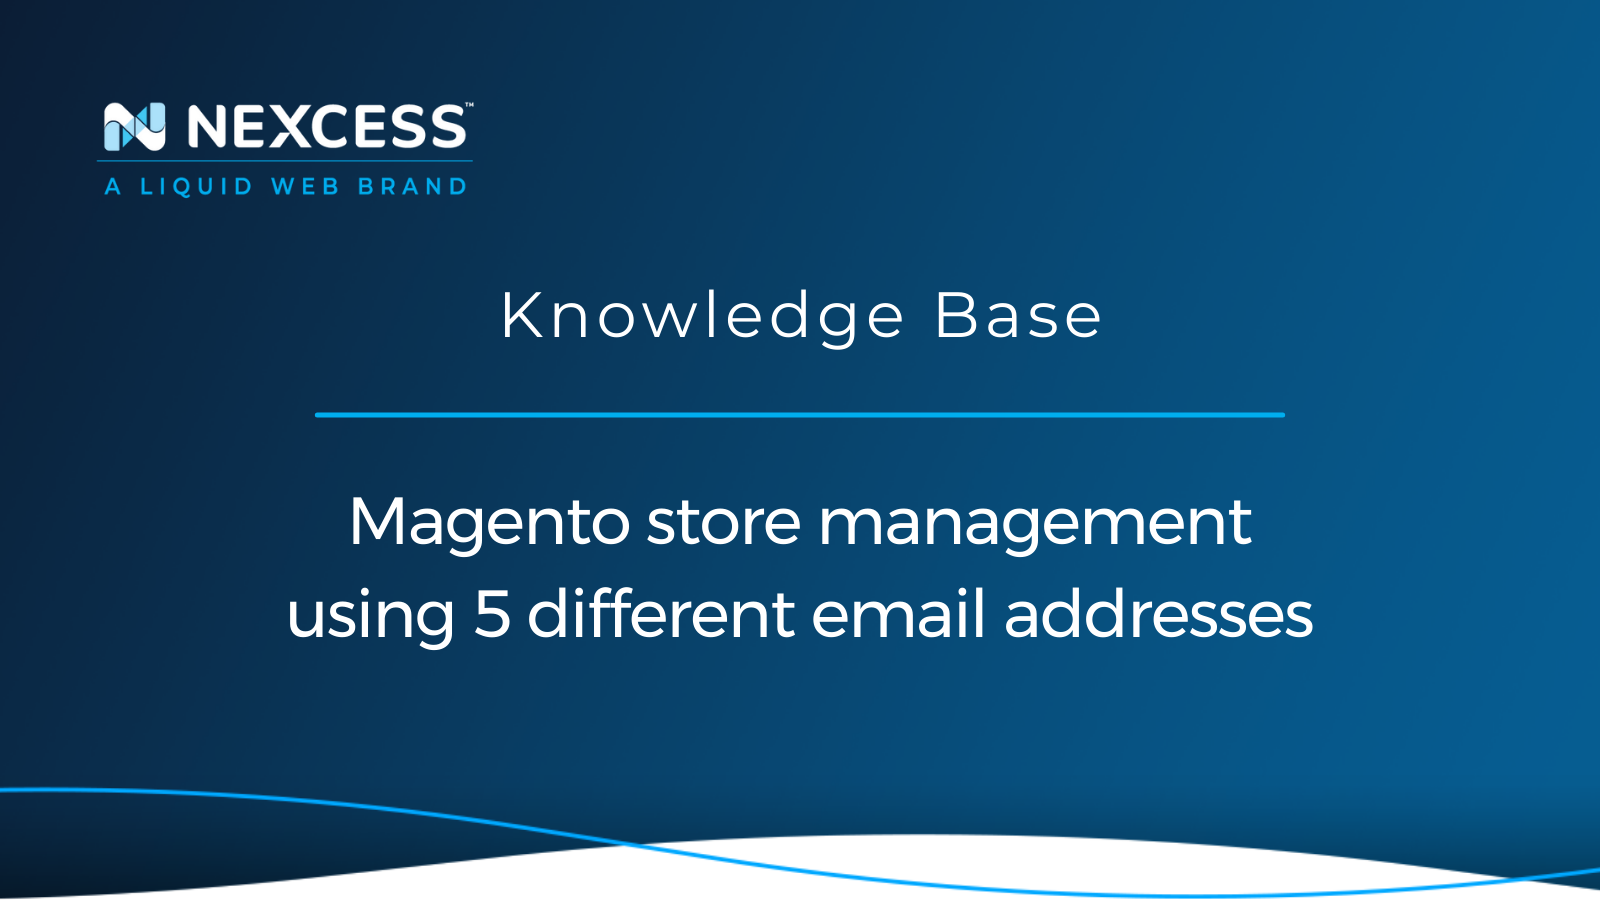 Magento store management using 5 different email addresses